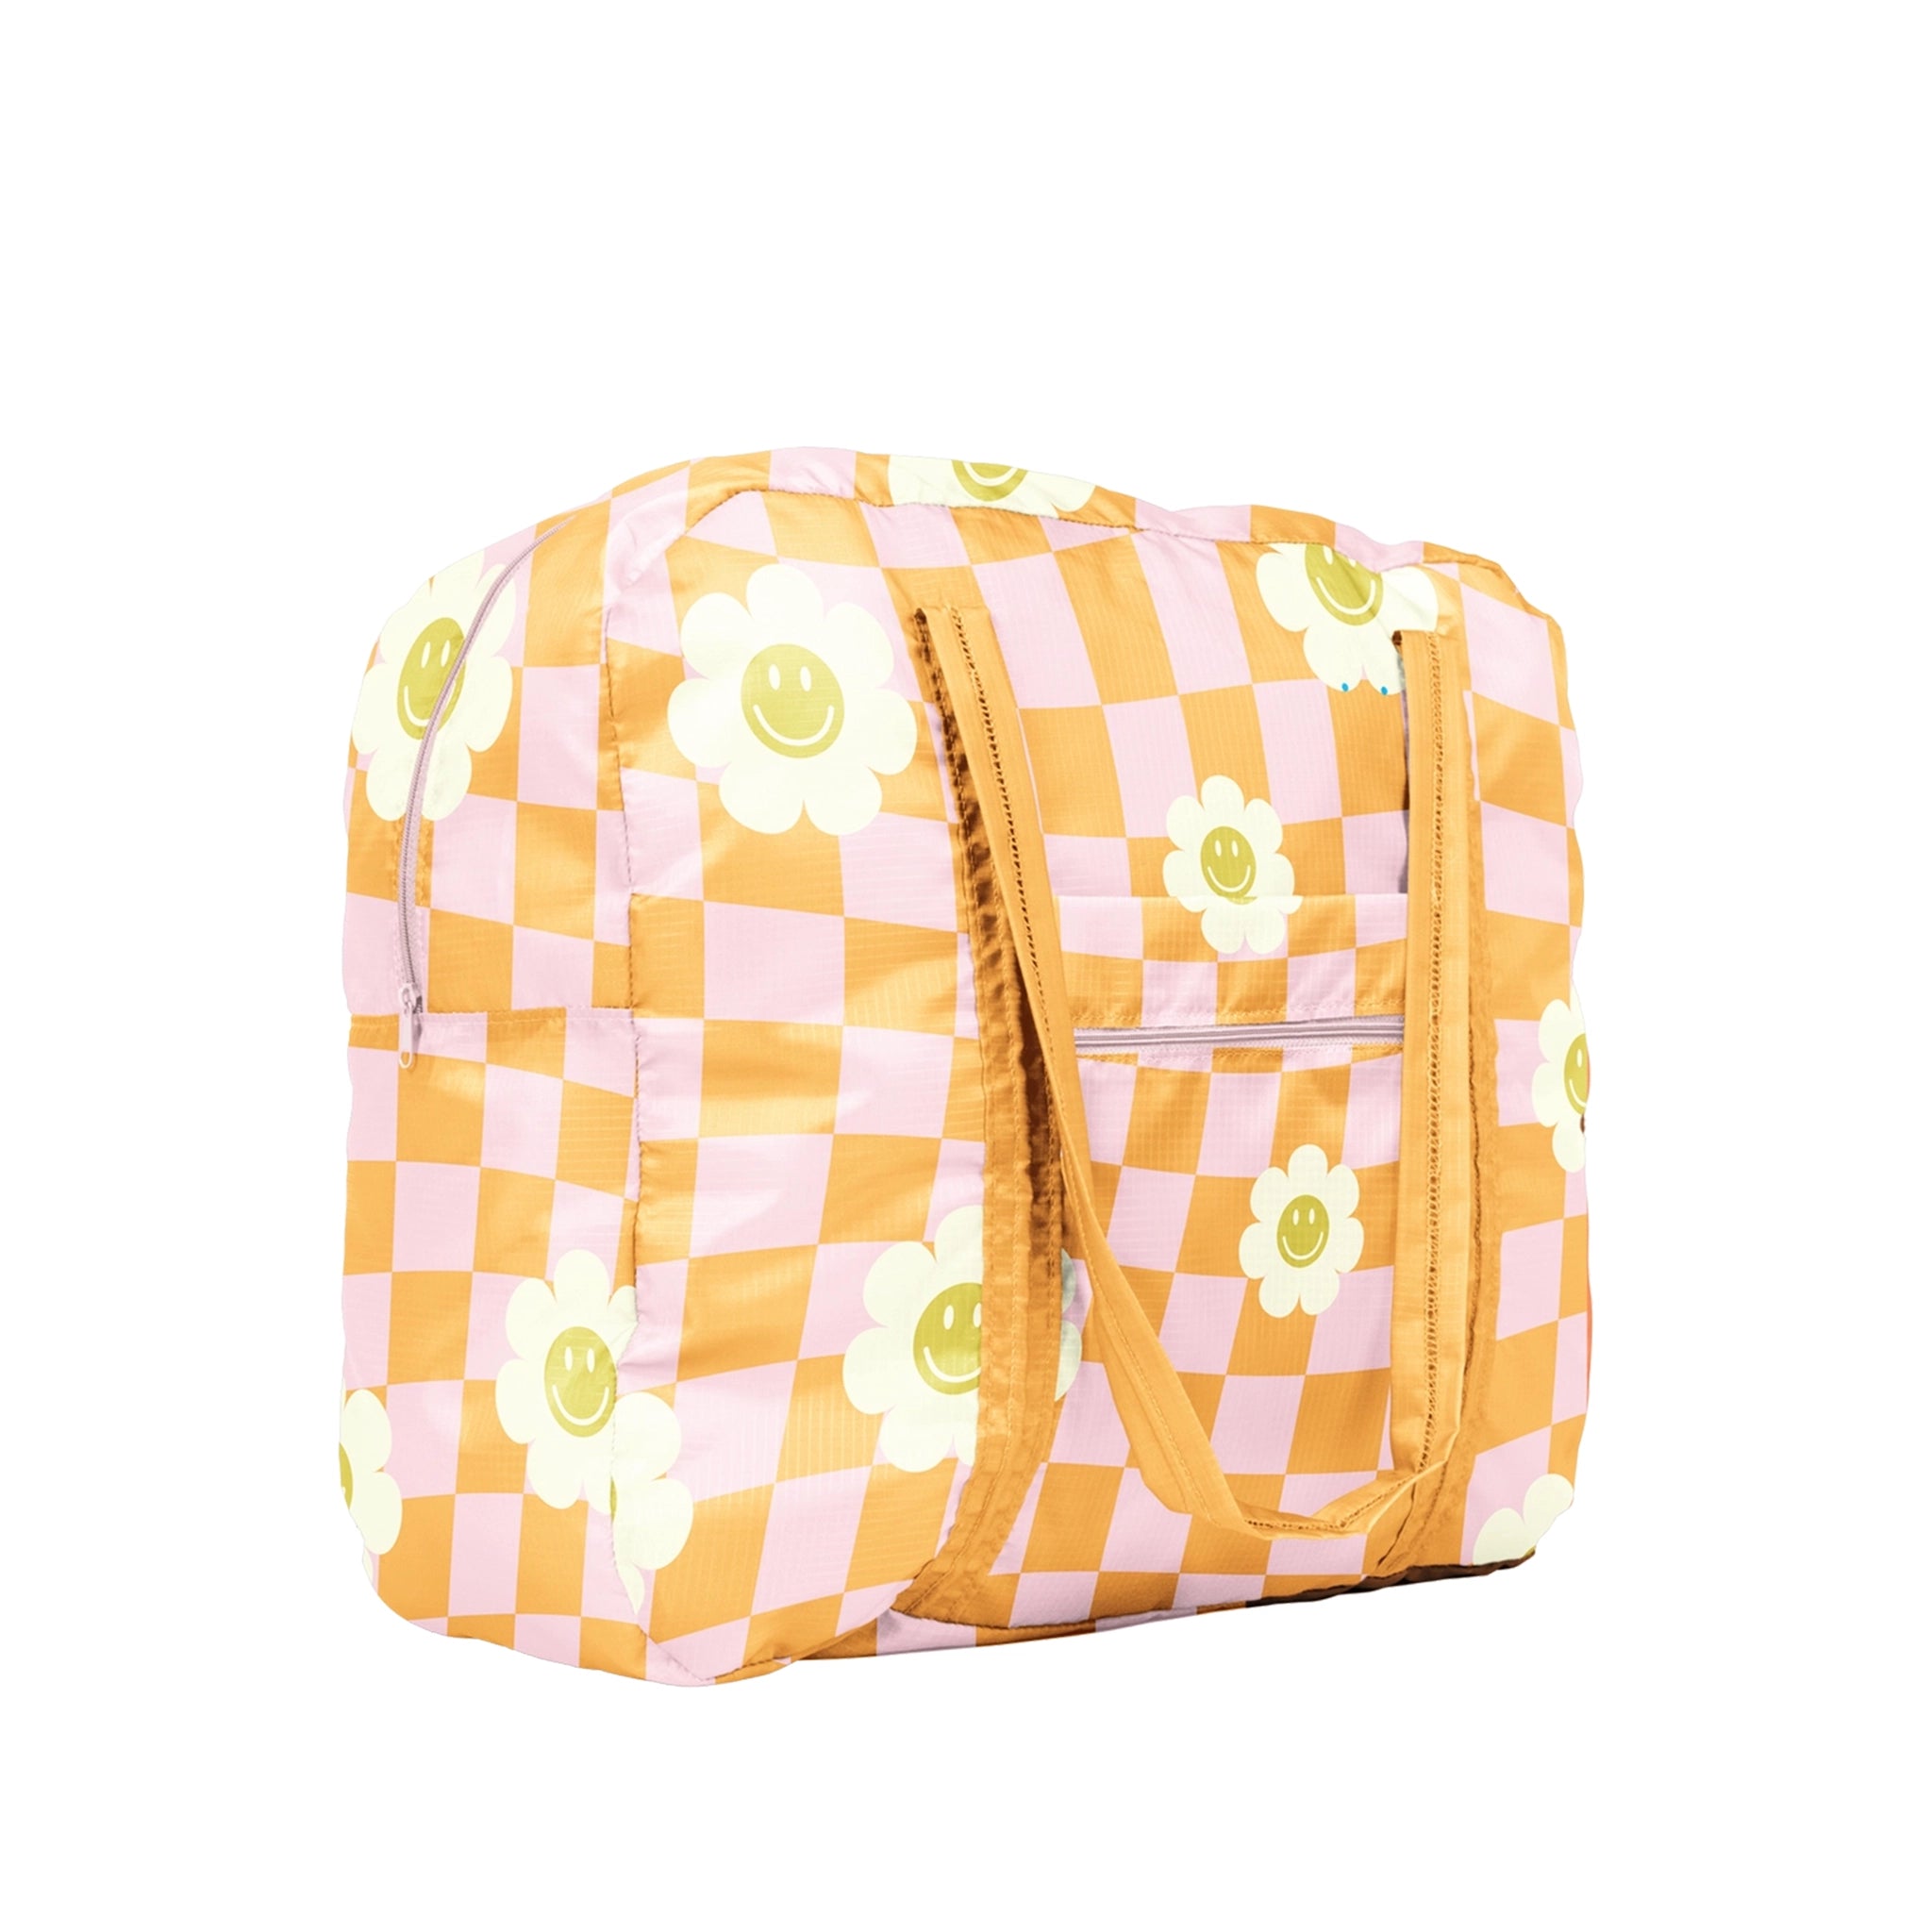 On a white background is an orange and pink checkered tote bag made of ripstop nylon. It features two shoulder handles and also has white and yellow smiley face daisies all over. 